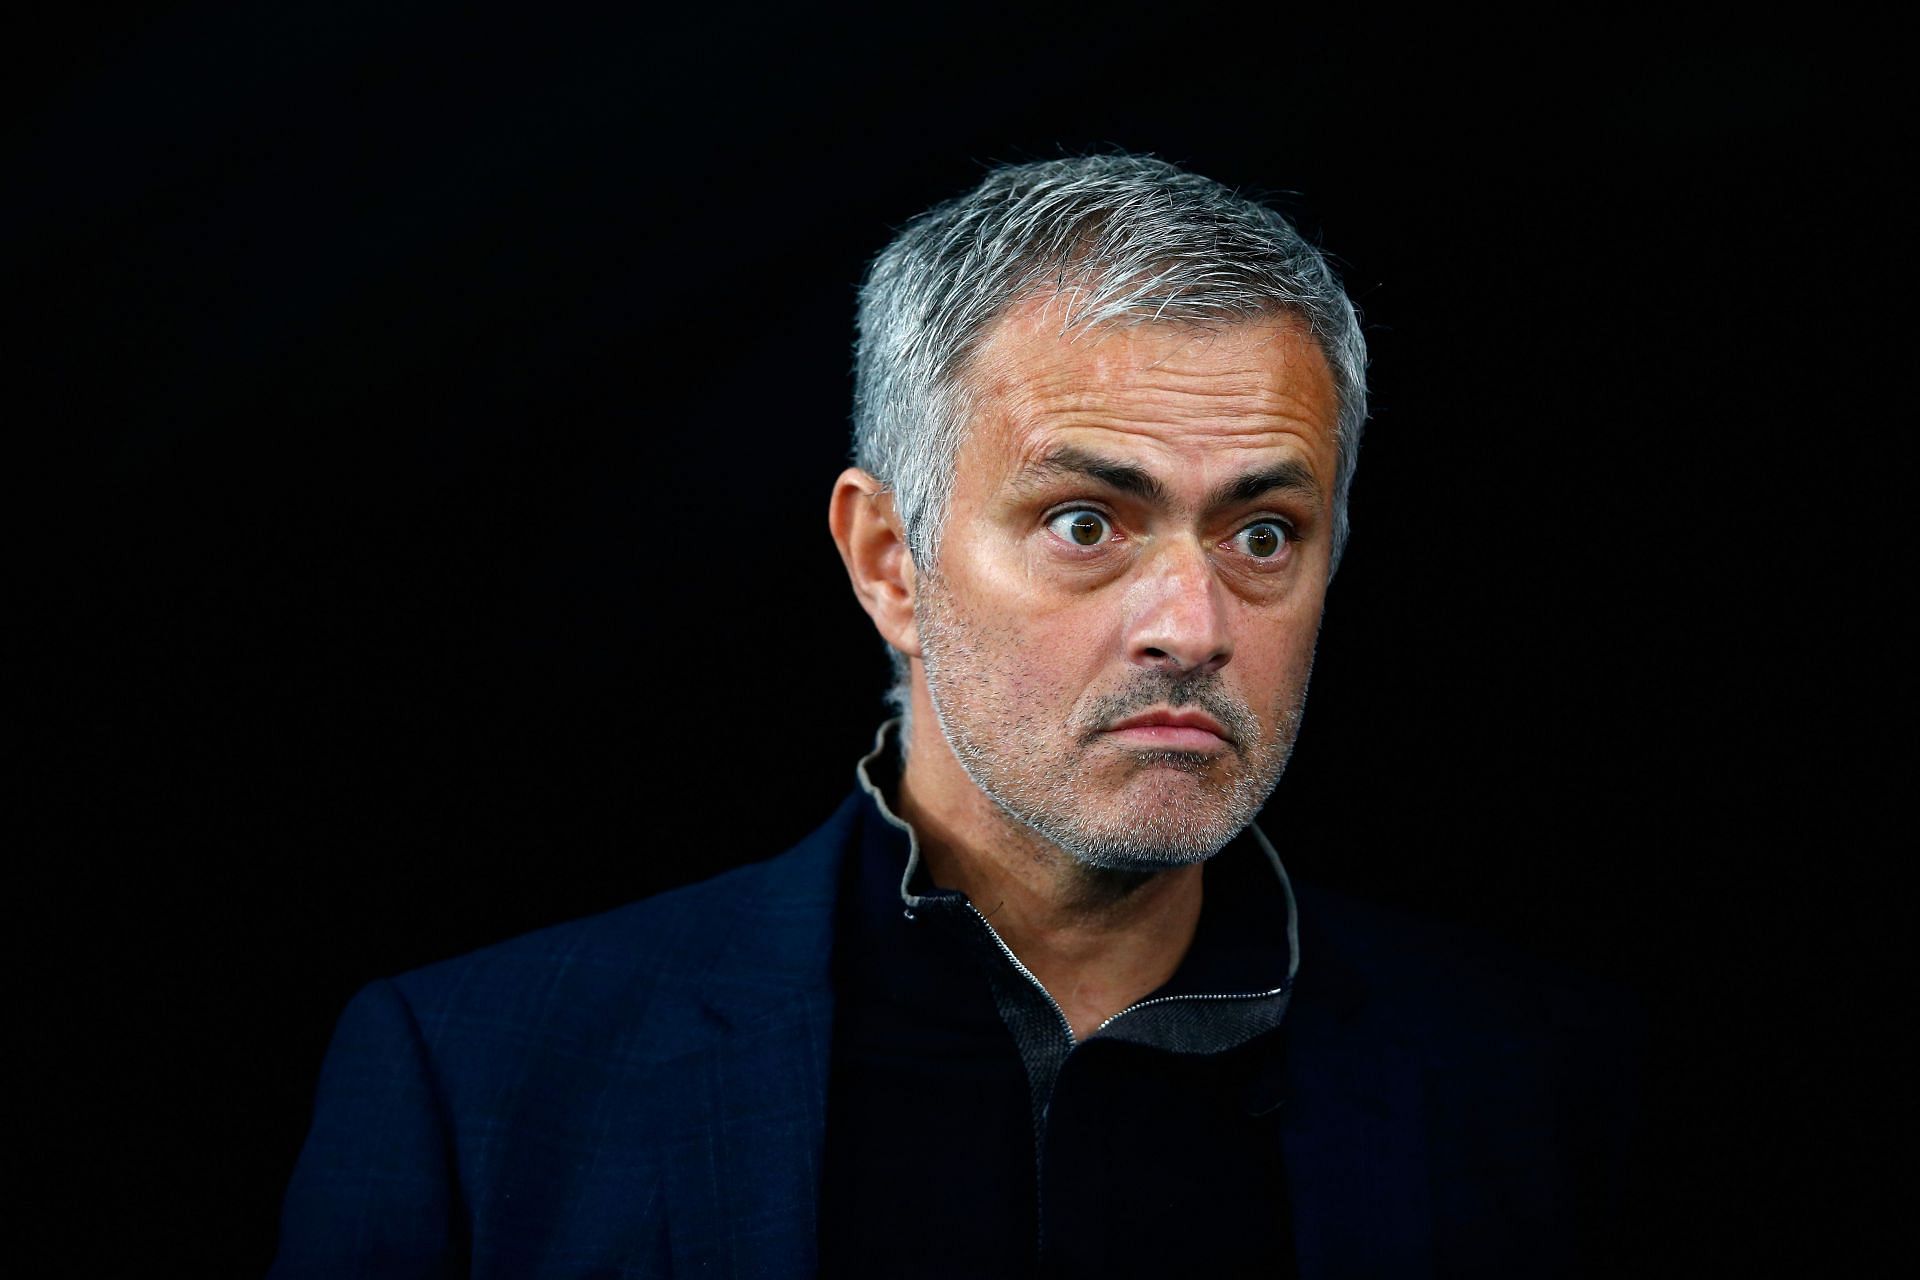 Could Mourinho be tempted into international football?